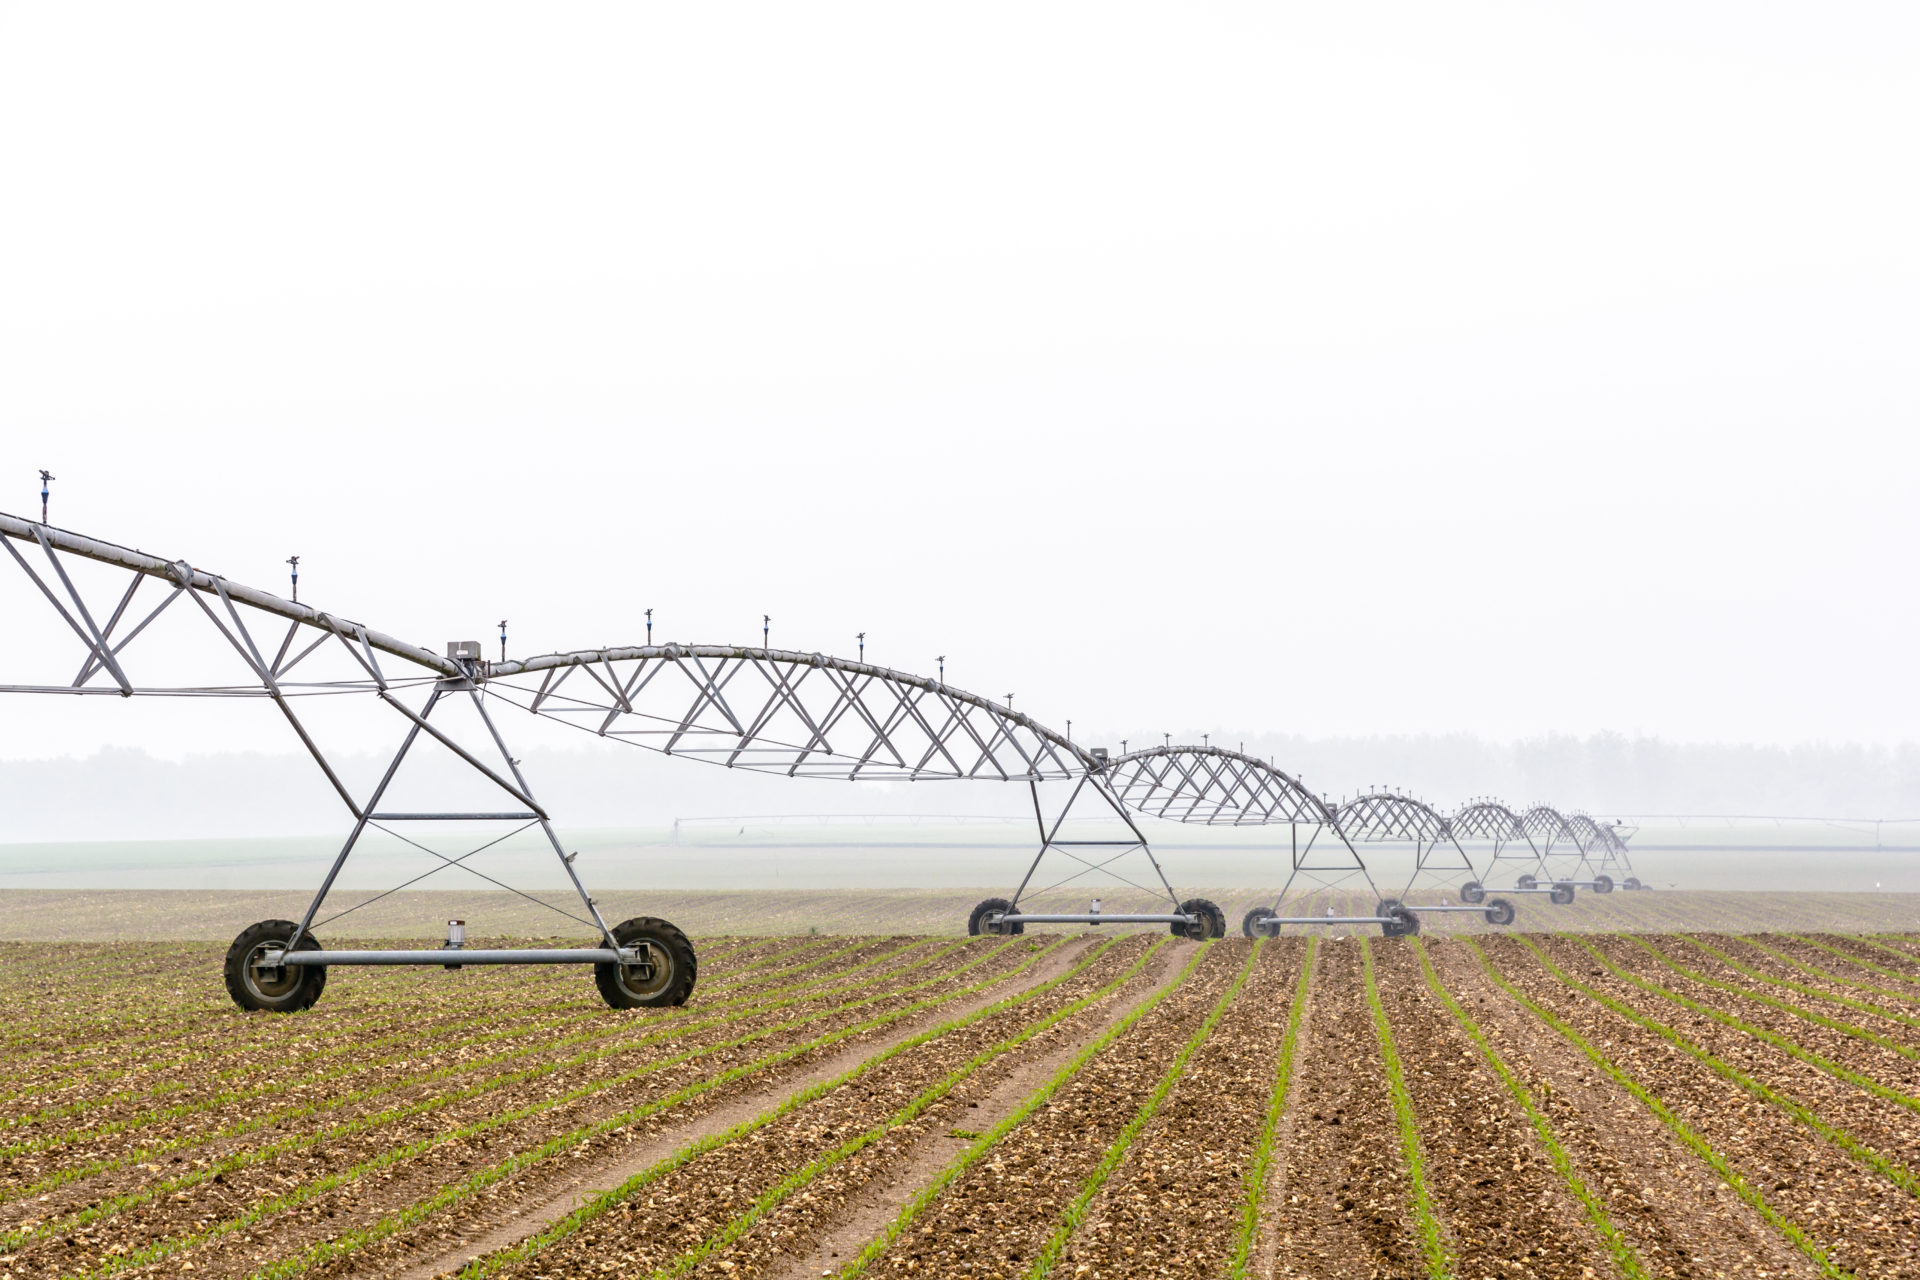 Center Pivot Irrigation System In a Corn Field, French Countryside.